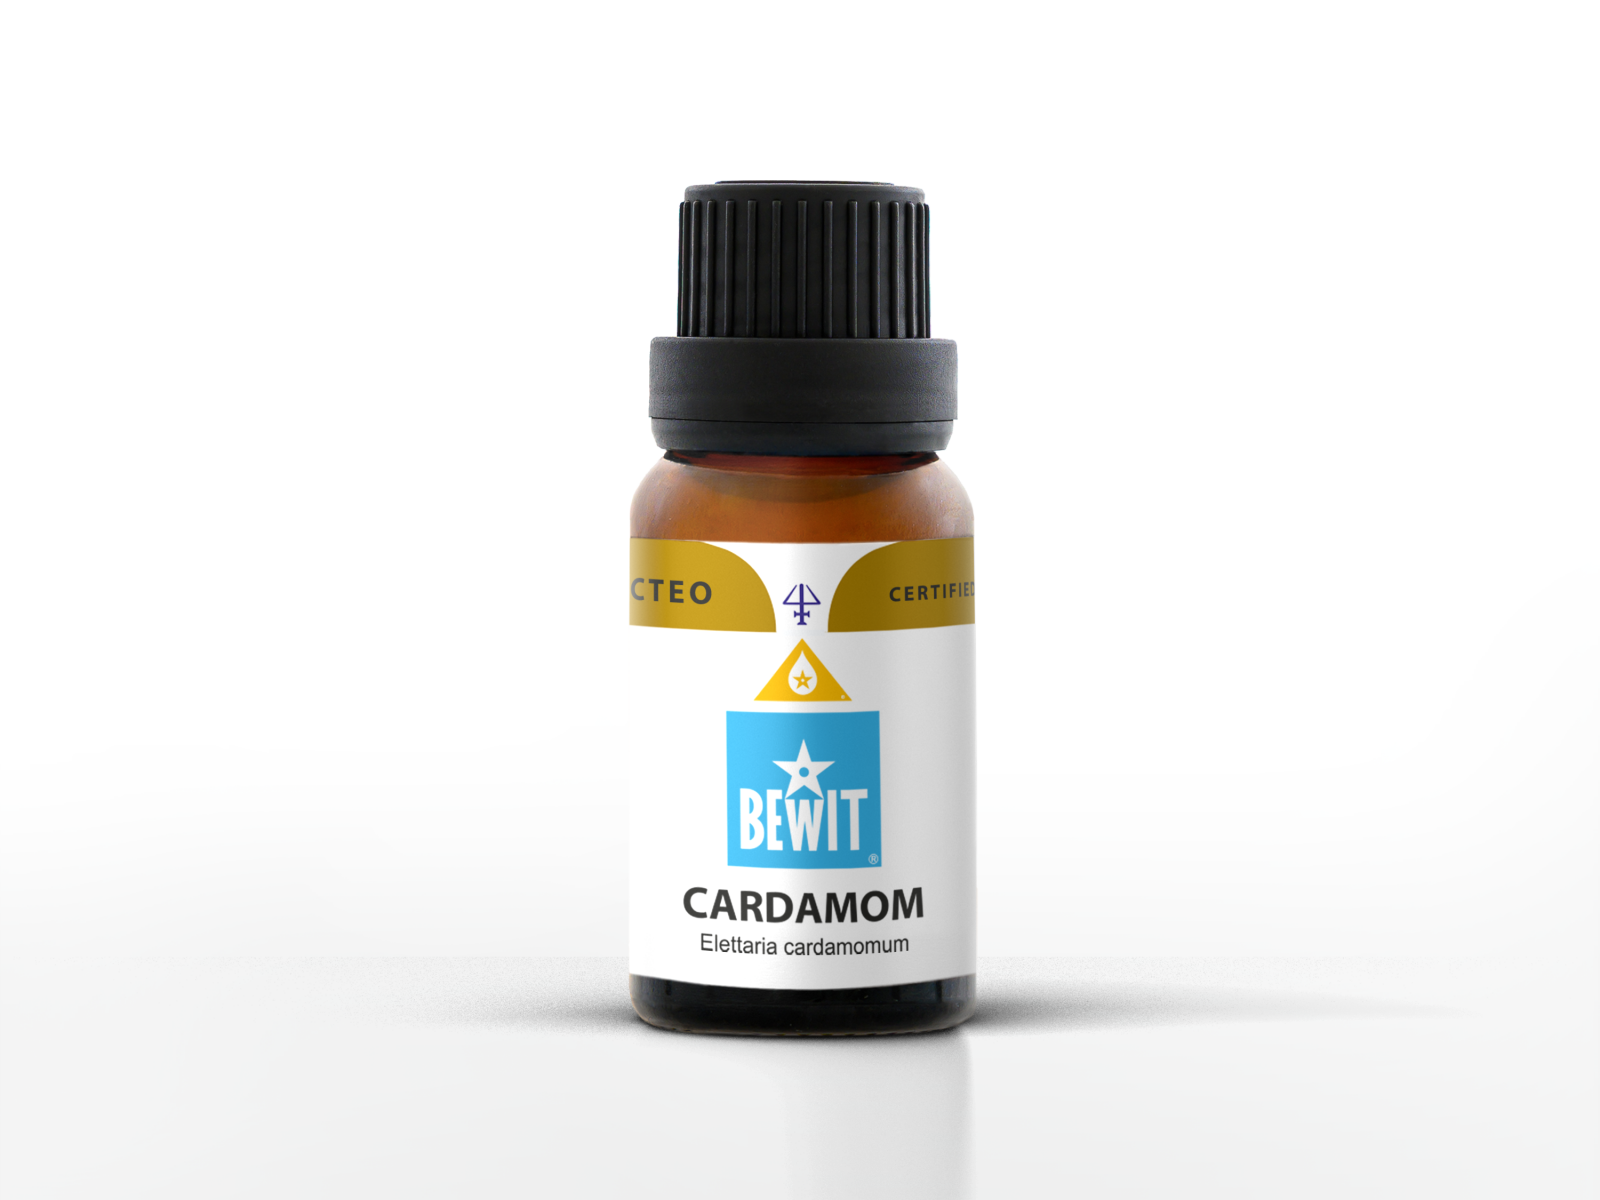 BEWIT Cardamom RAW, CO₂ - 100% pure essential oil - 3